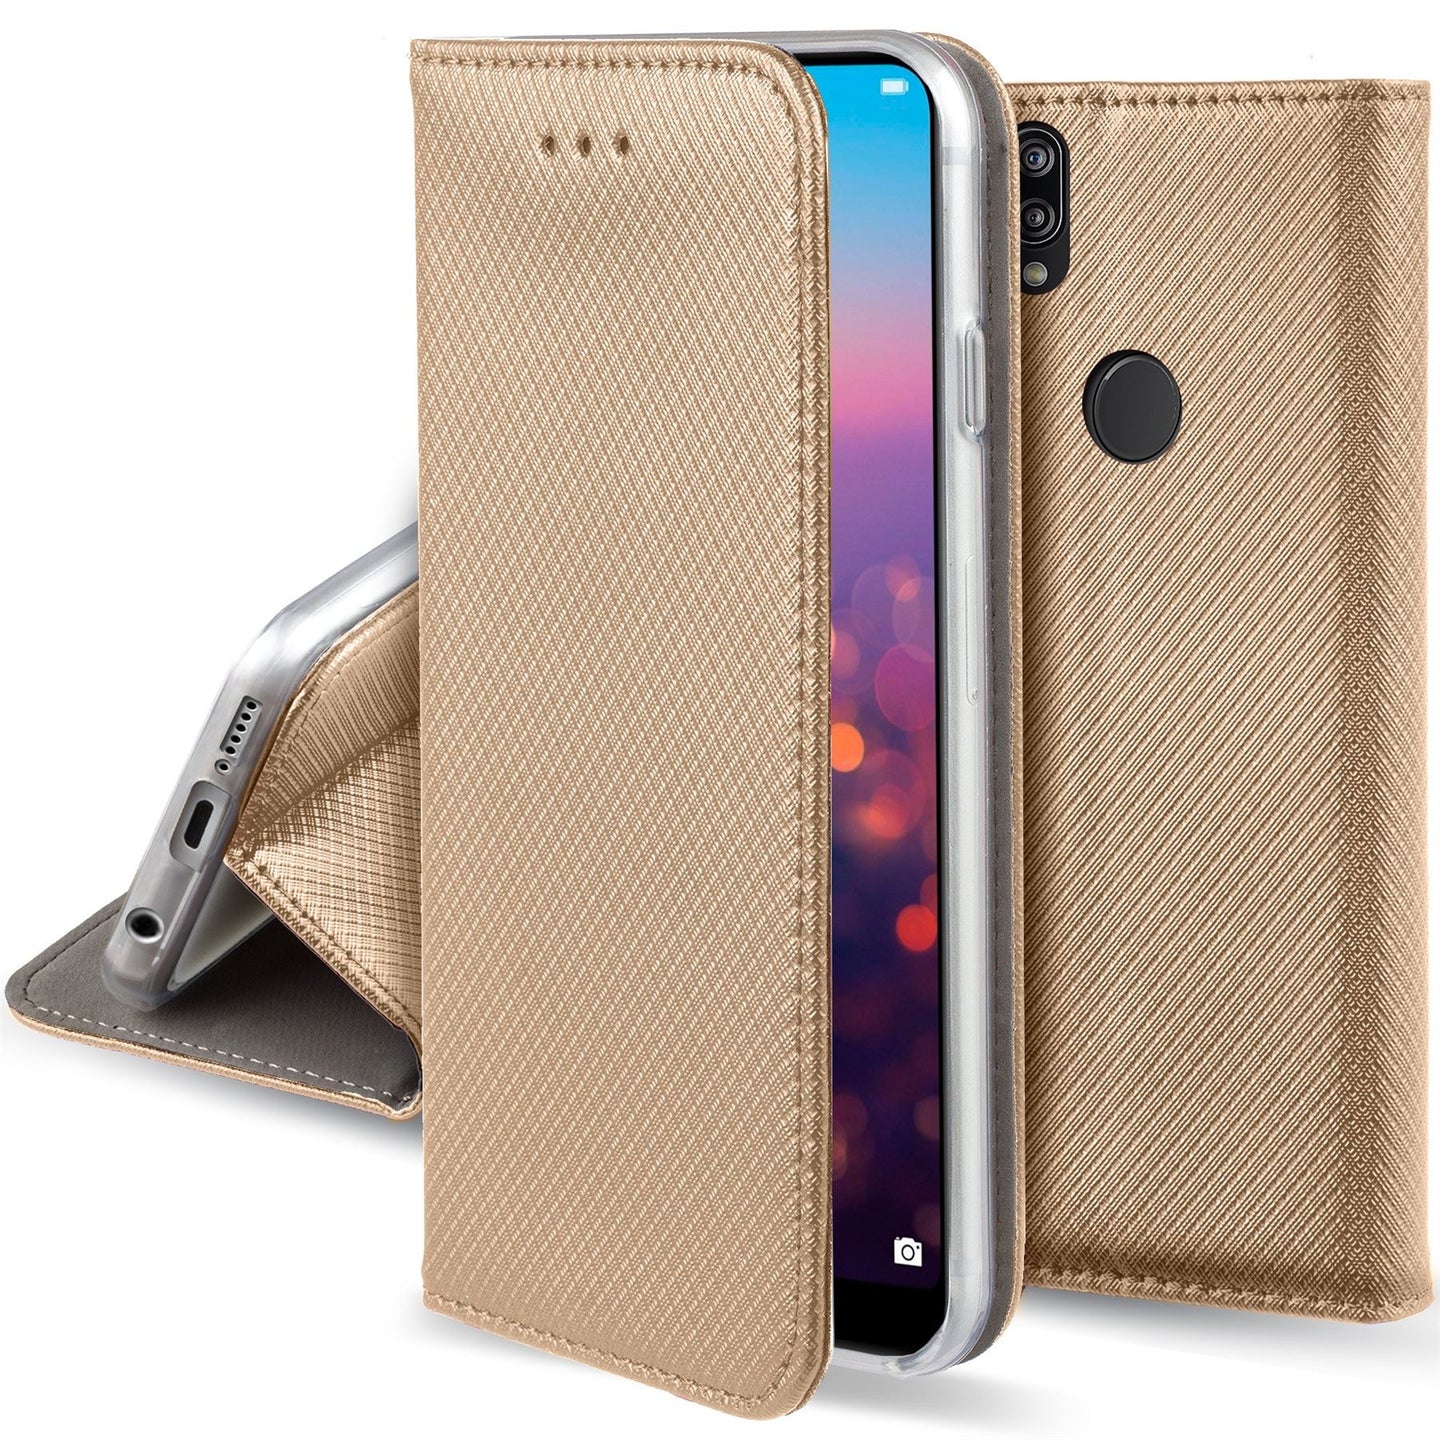 Moozy Case Flip Cover for Huawei P20 Lite, Gold - Smart Magnetic Flip Case with Card Holder and Stand